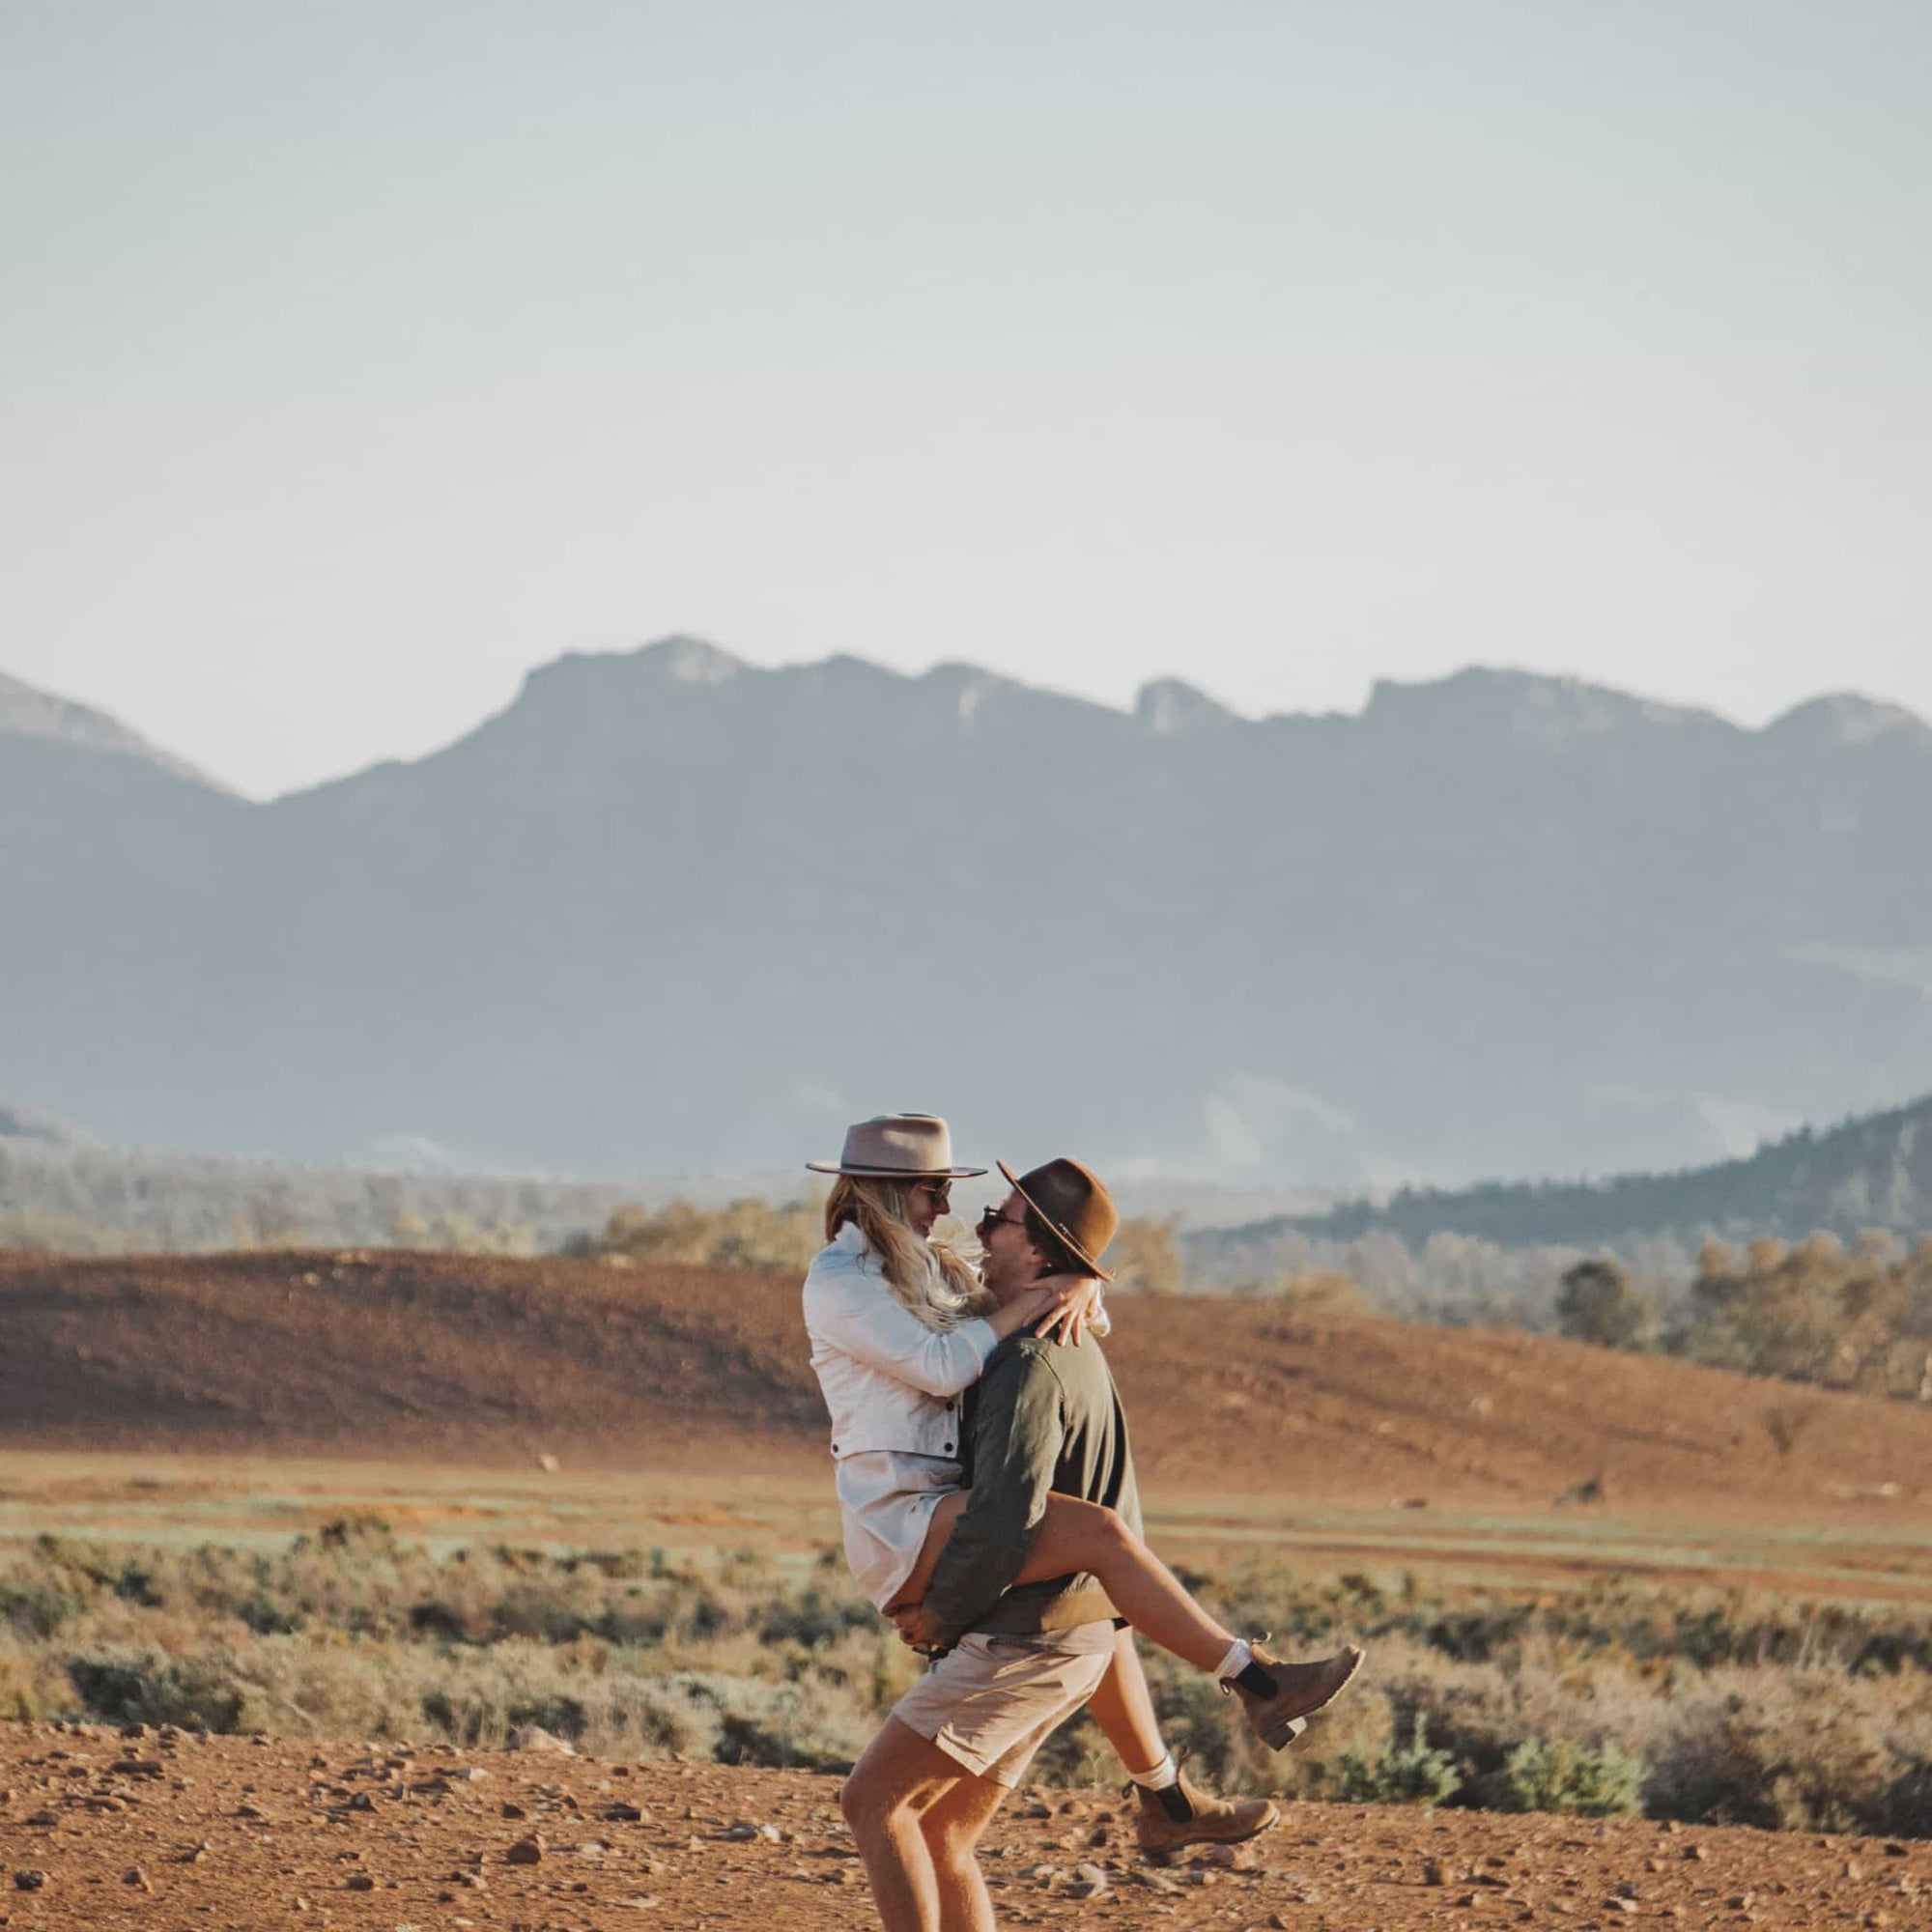 A young couple hugging in the middle of the desert in Australia